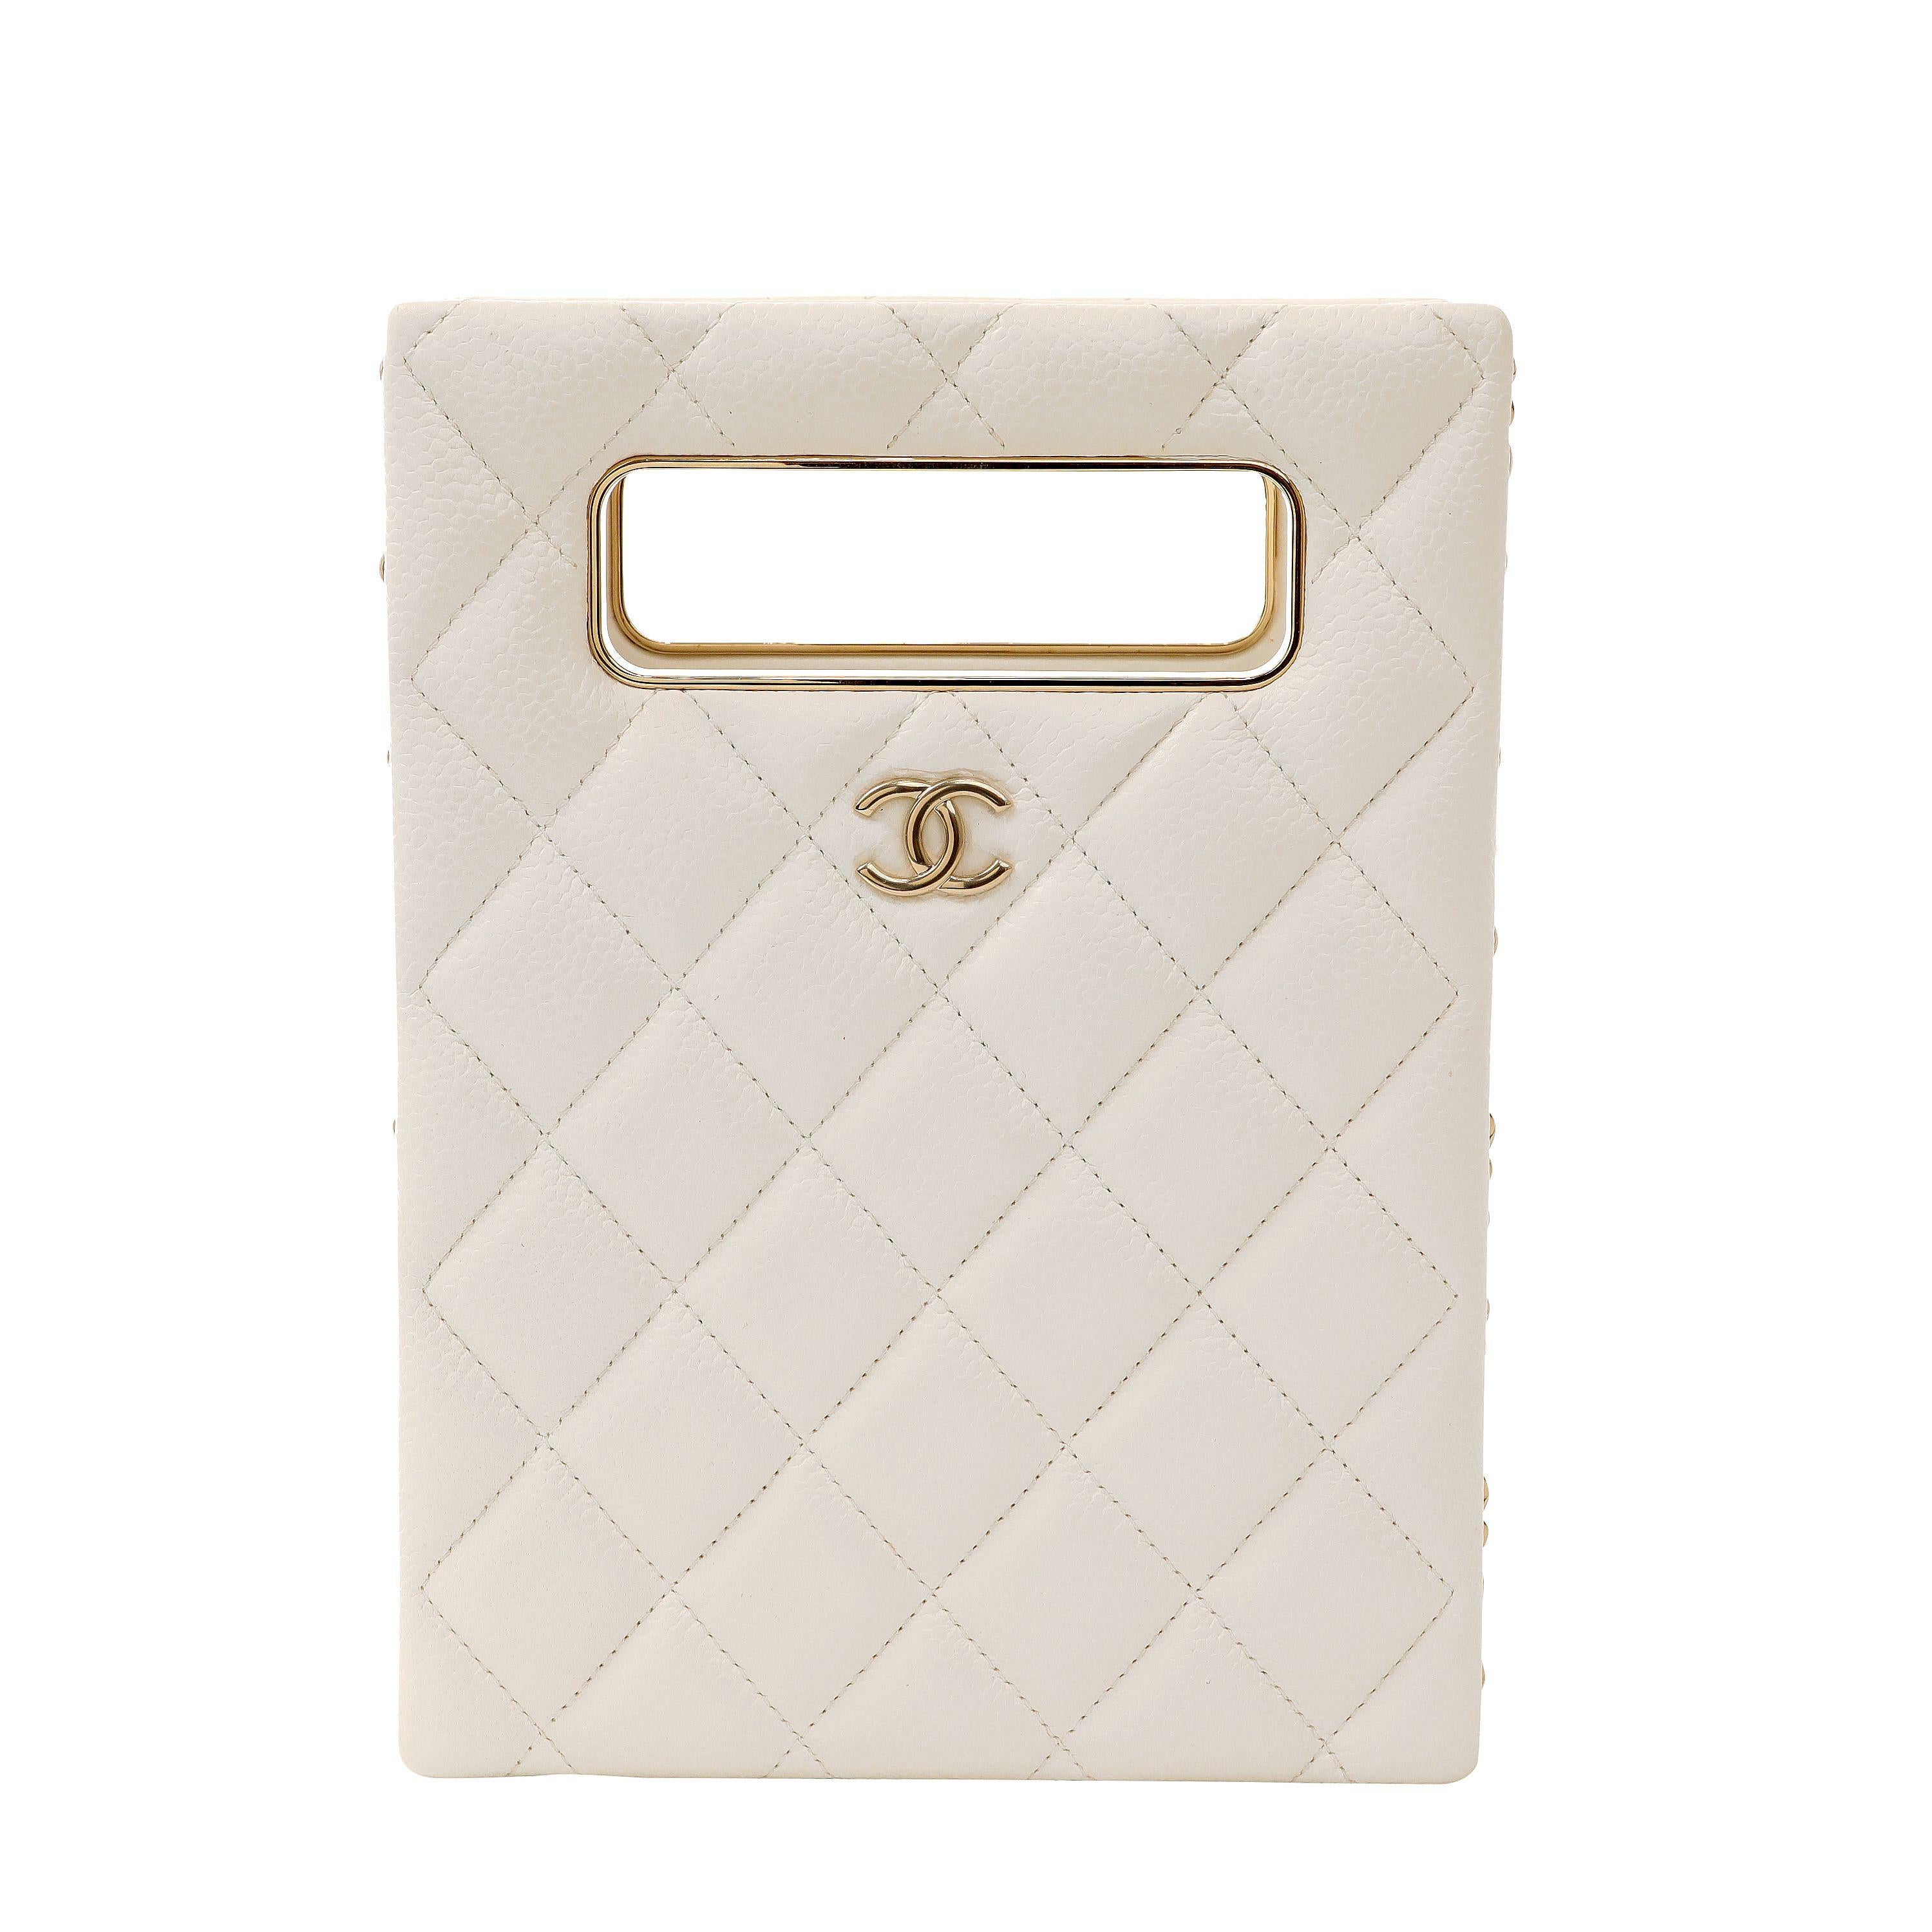 
This authentic Chanel White Caviar Matelasse Crossbody bag is in pristine condition.  From Chanel’s Spring/ Summer 2022 collection, this elegant crossbody bag is a must have. 
Textured white caviar leather is quilted in signature Chanel diamond